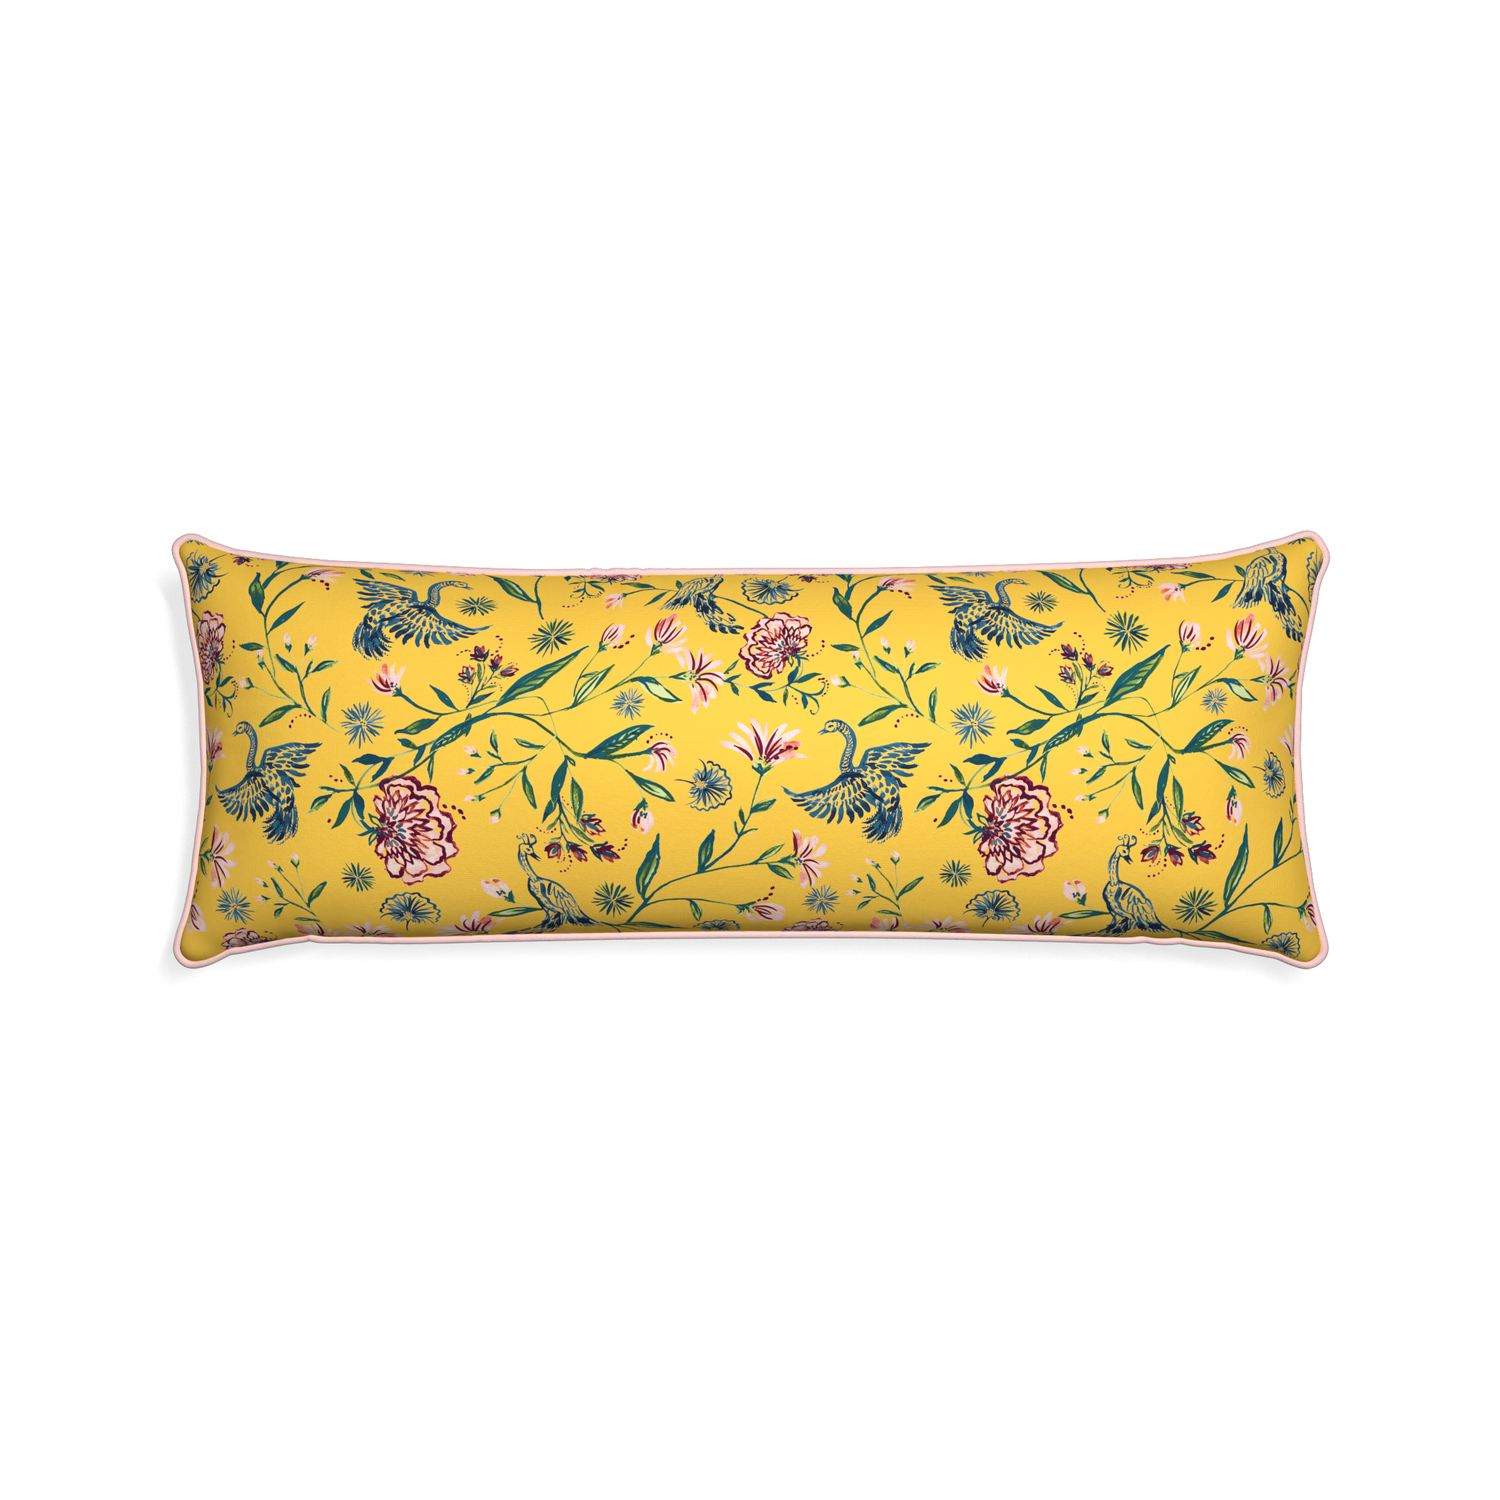 Xl-lumbar daphne canary custom pillow with petal piping on white background